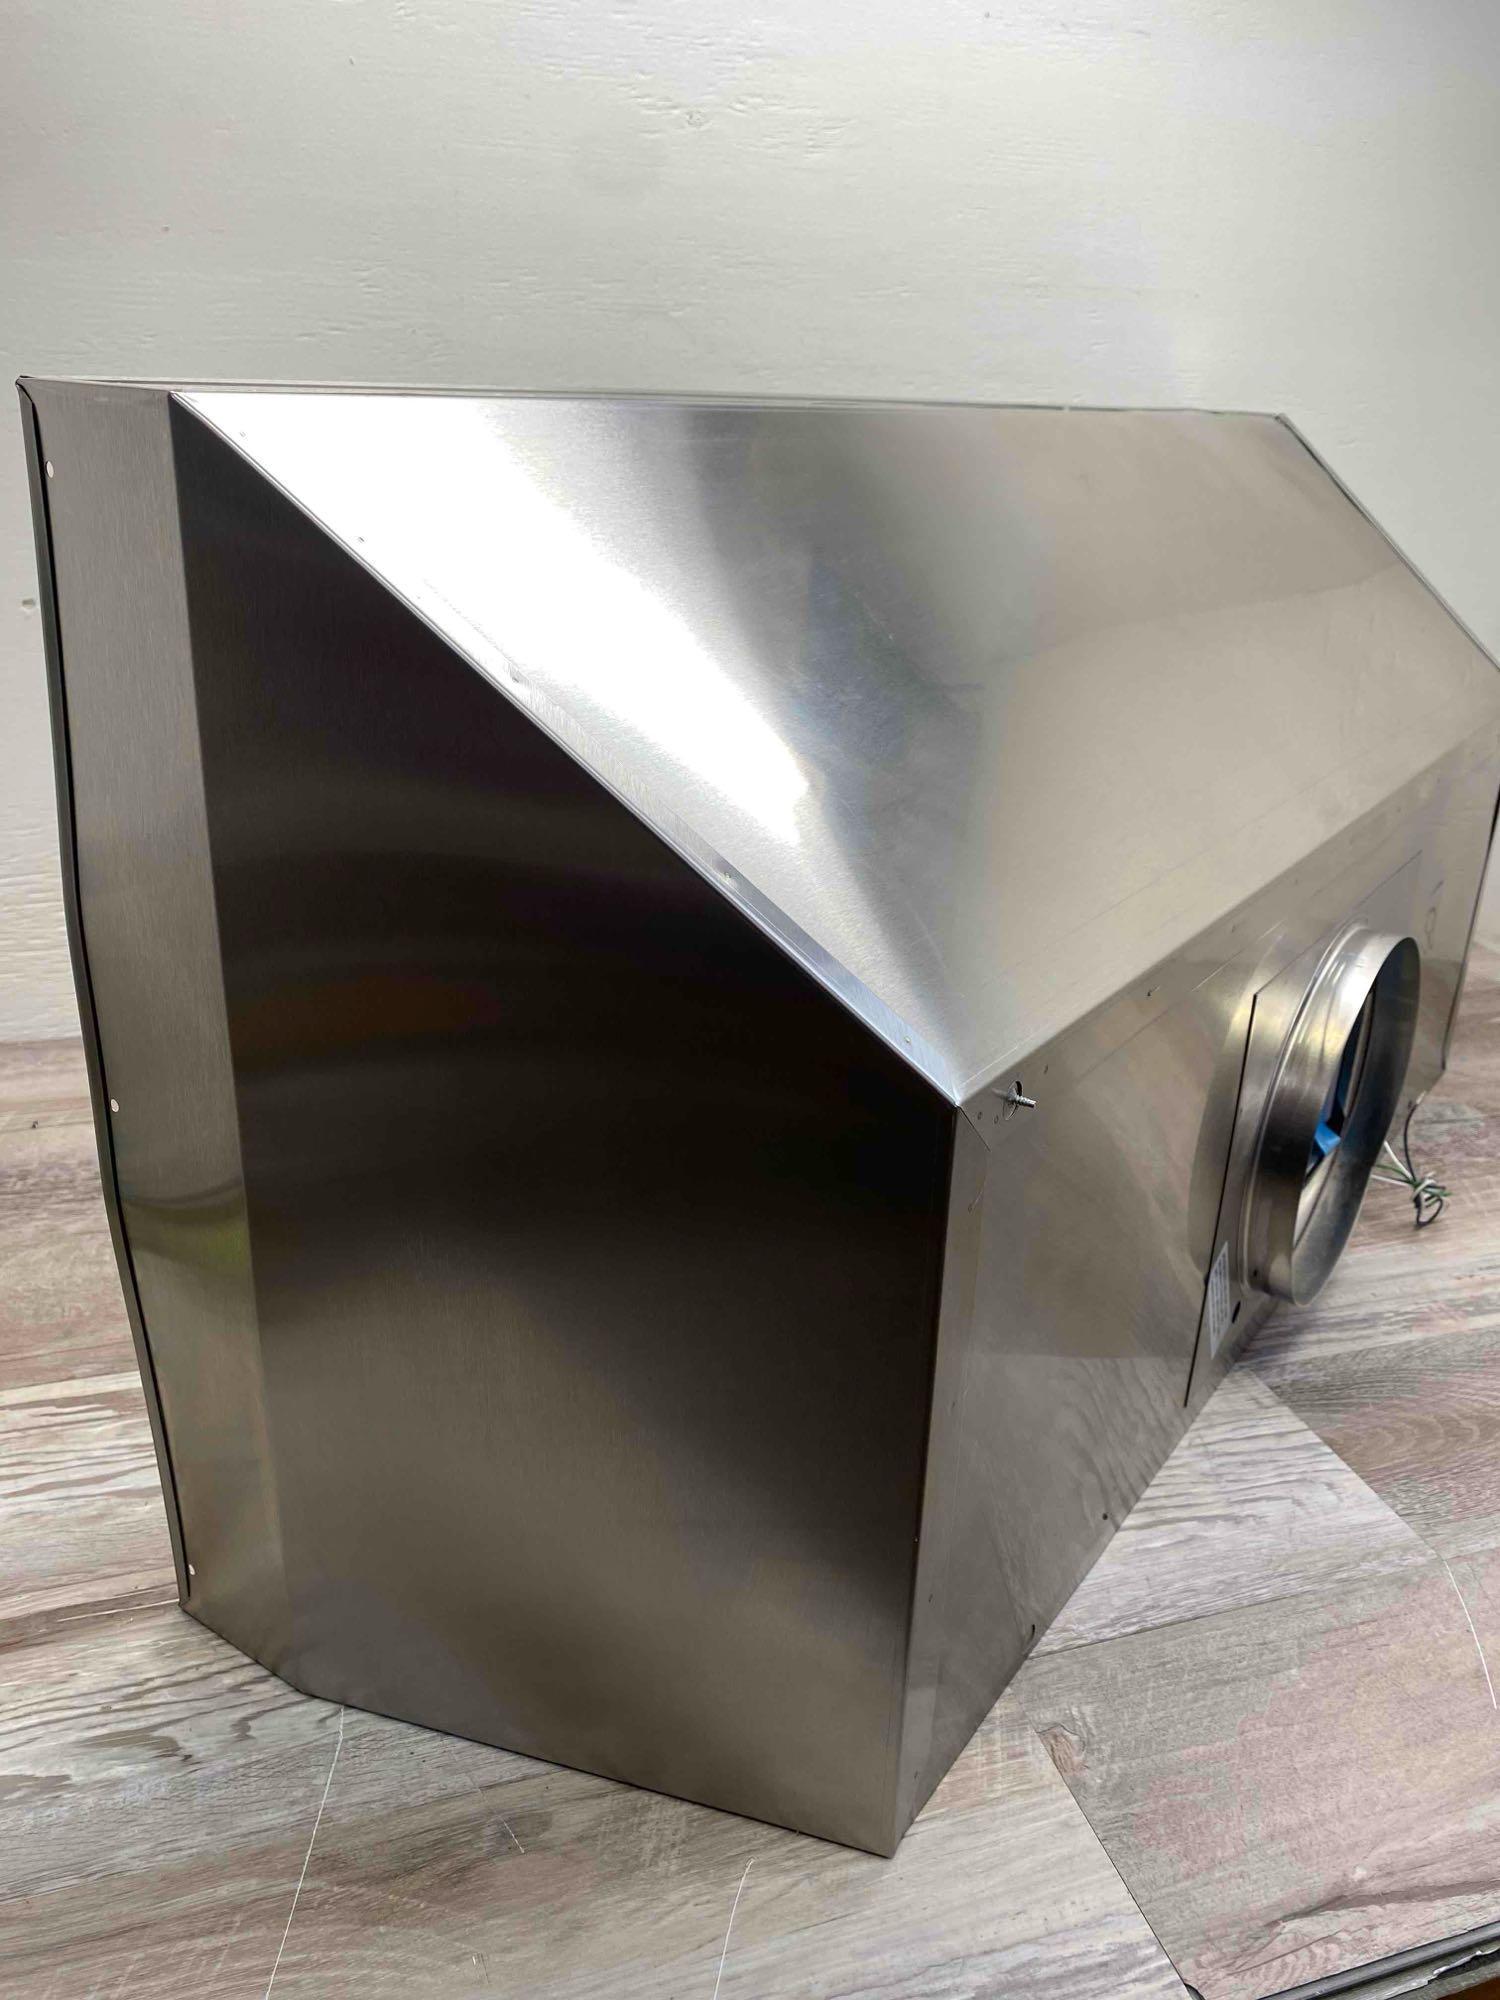 Vent-A-Hood 42" Wall Mounted Hood Stainless Steel/600 CFM